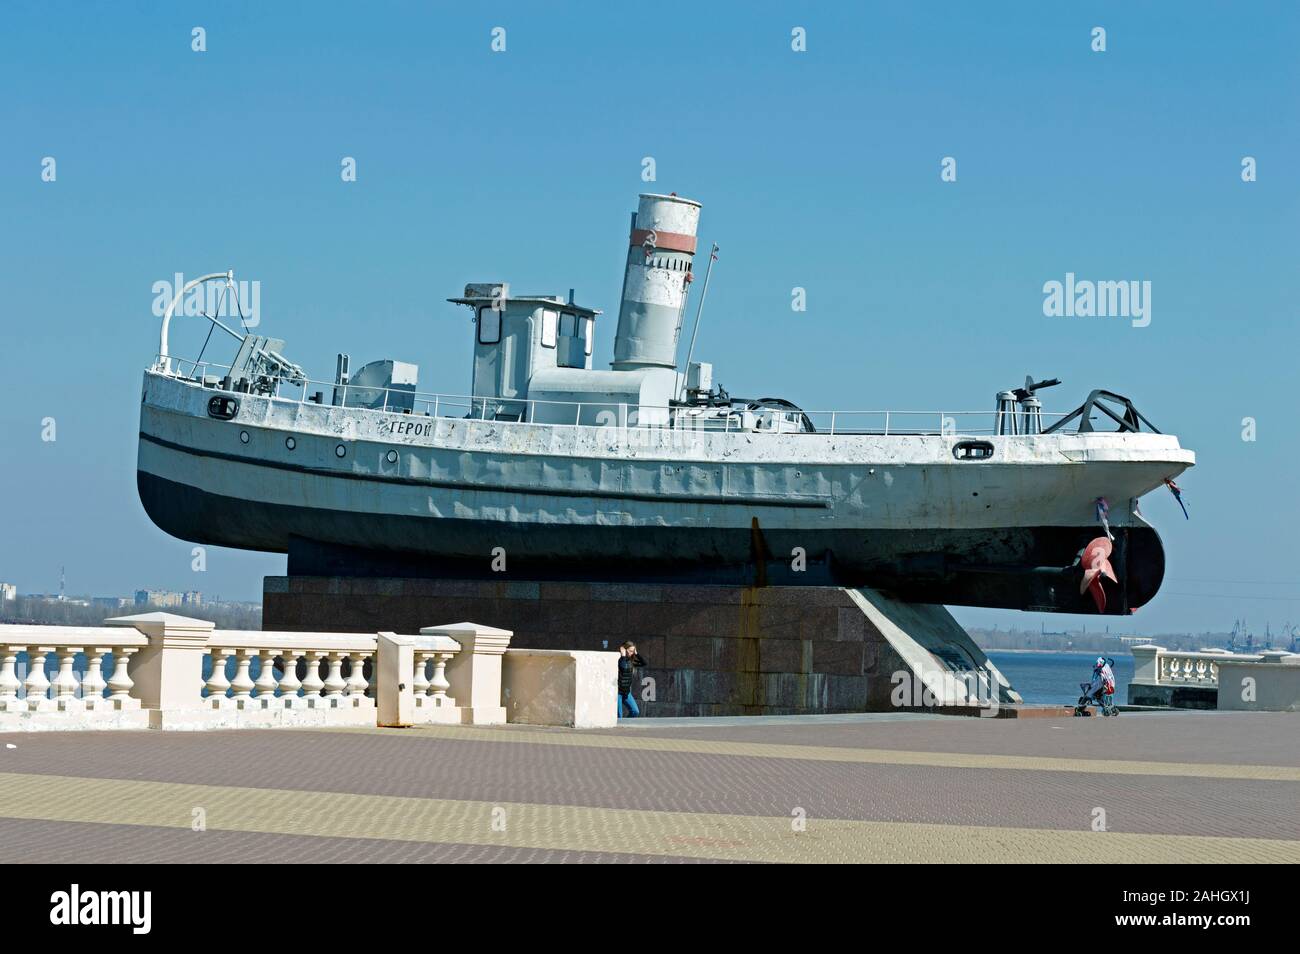 Boat on a pedestal in Nizhny Novgorod. Member of the Battle of Stalingrad. Monument to the soldiers. Stock Photo